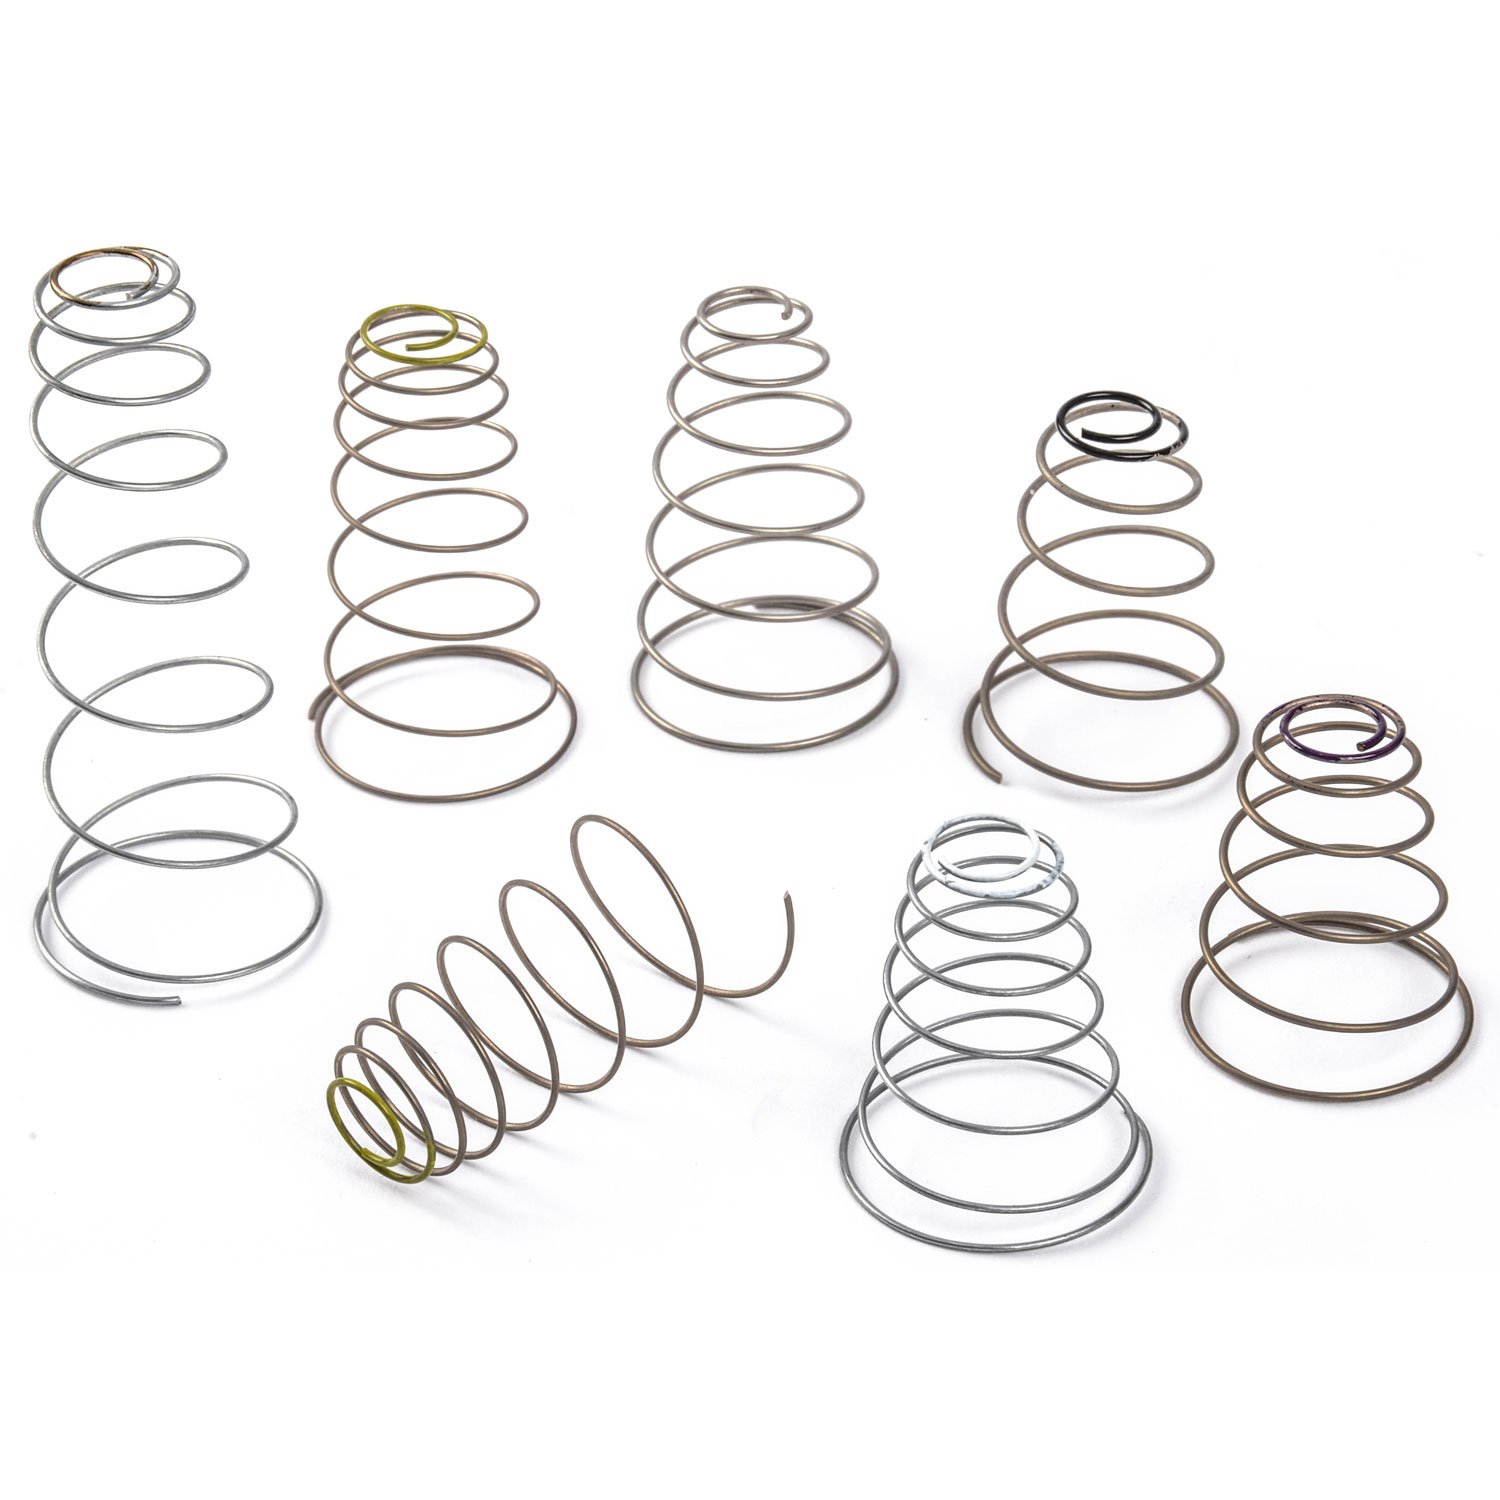 Vacuum Secondary Spring Kit Assorted tensions to change secondary"s operating range